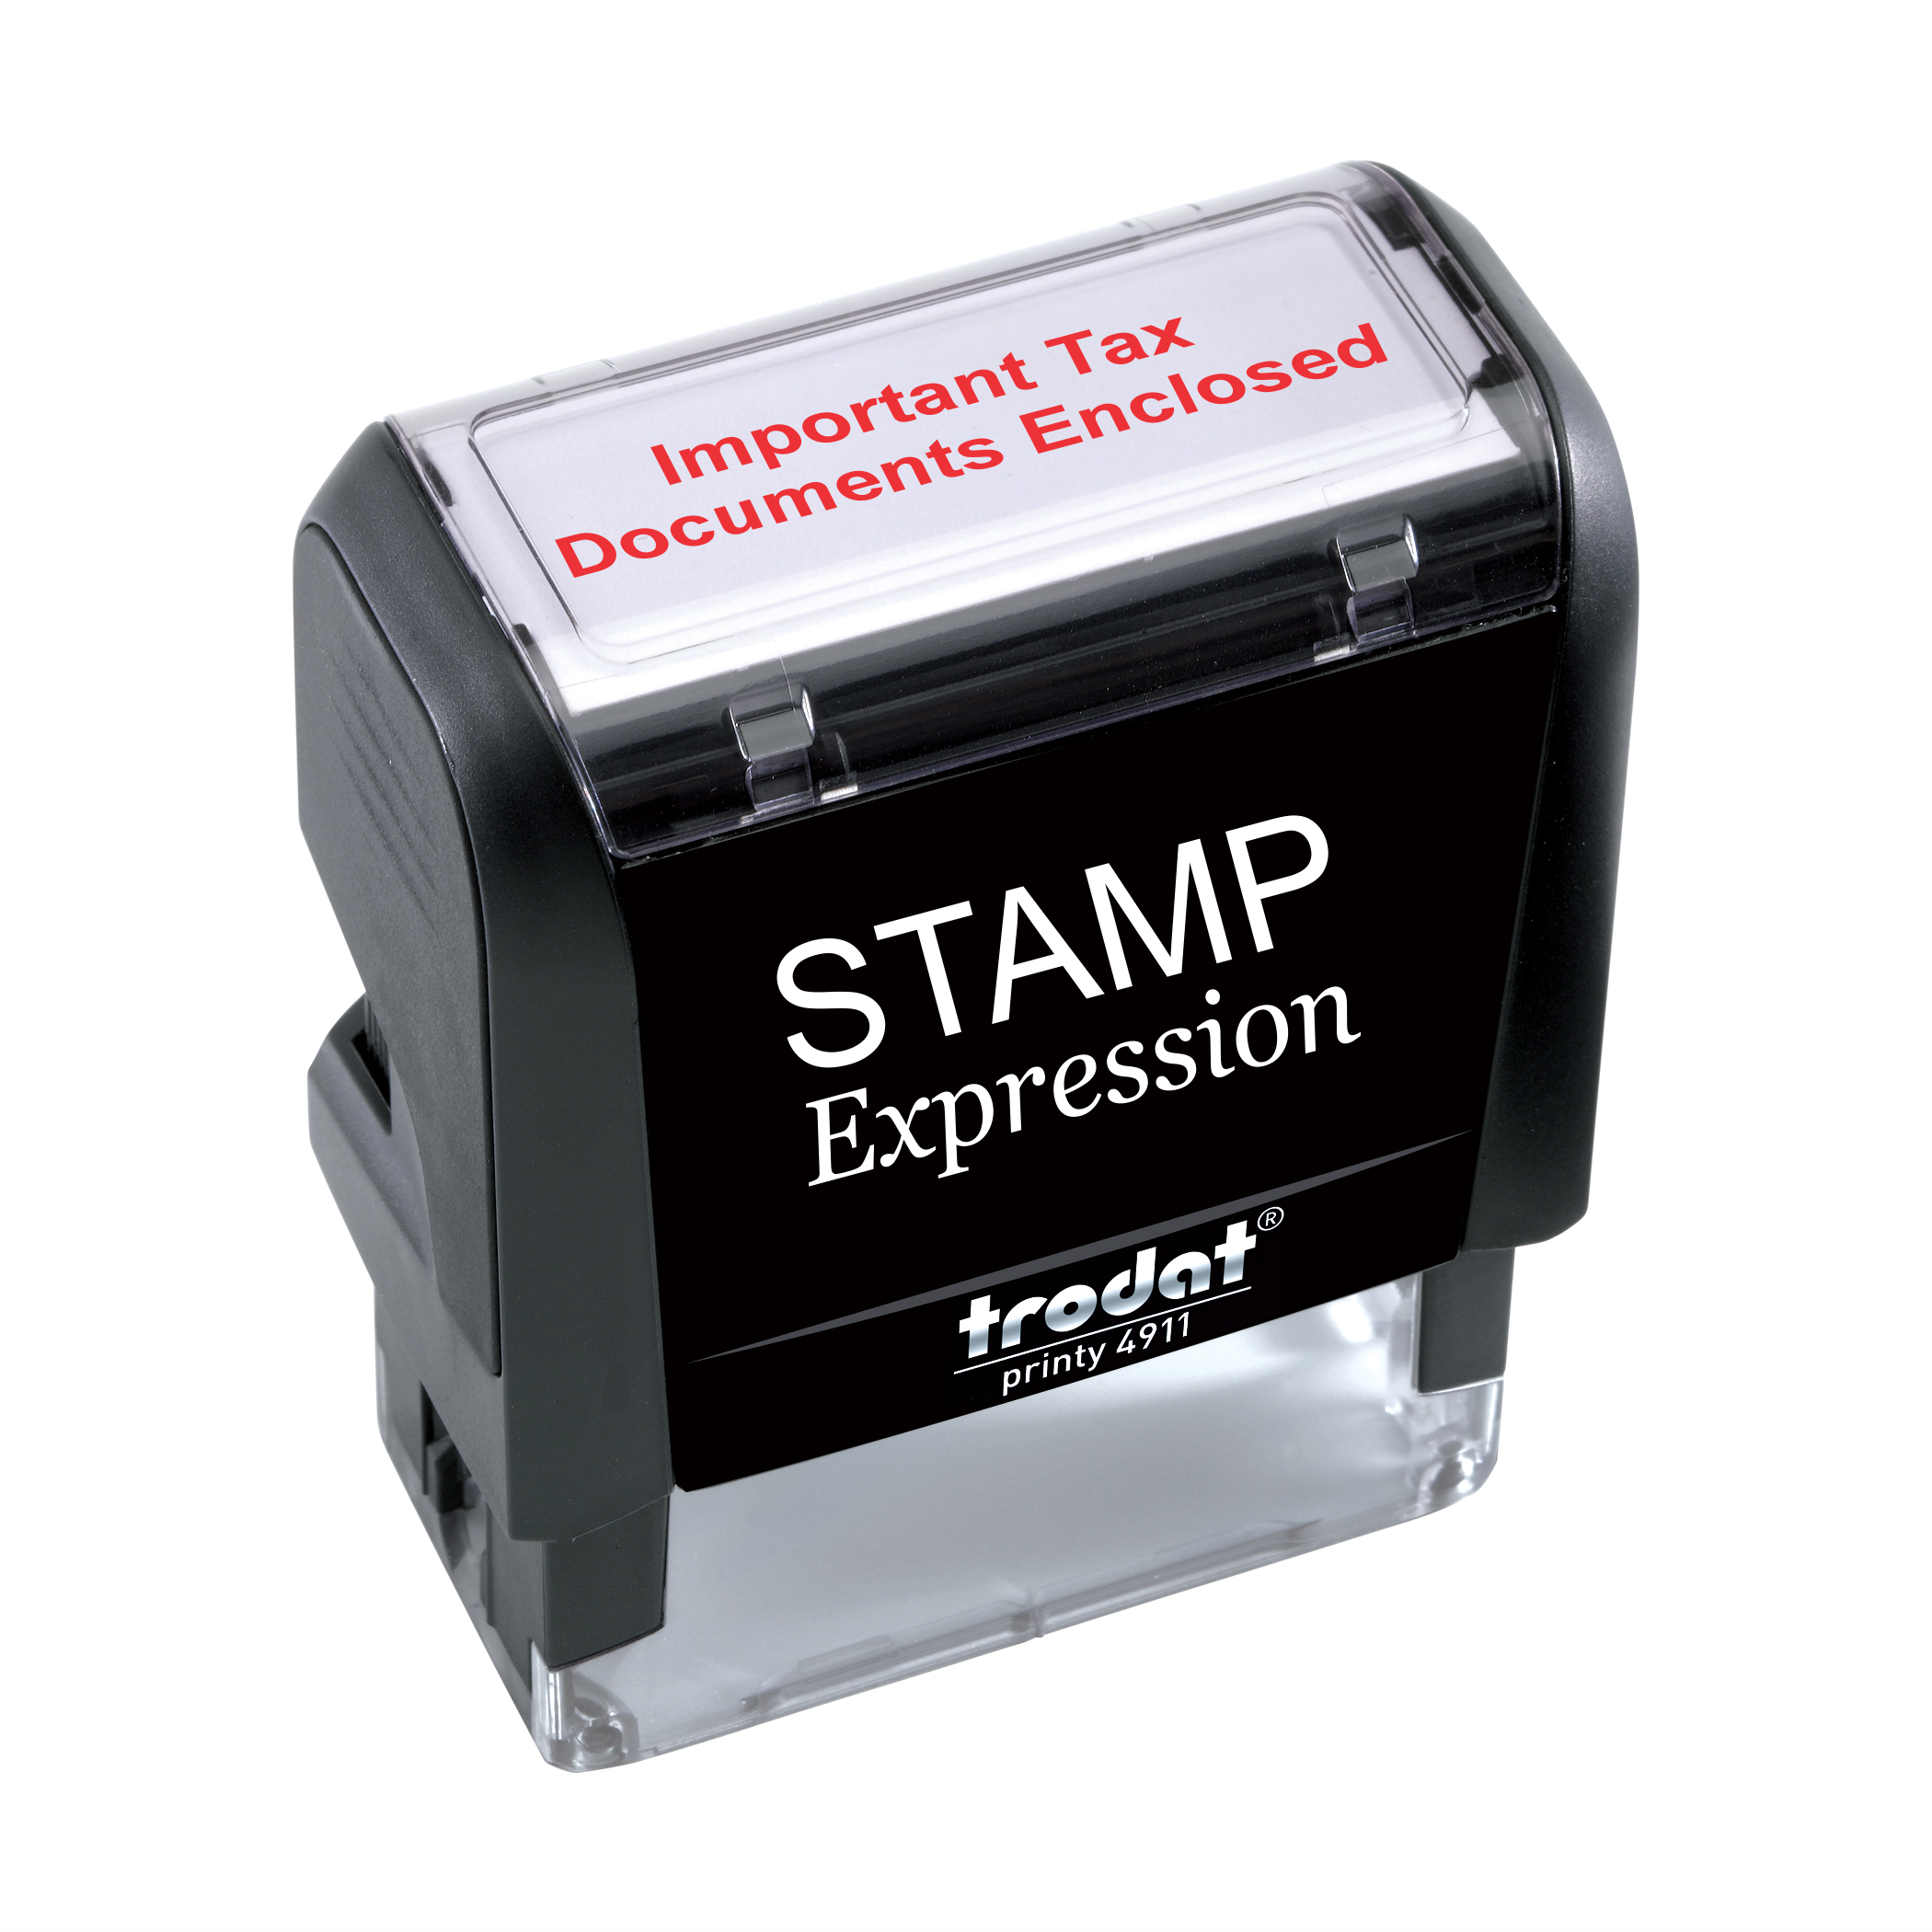 Important Tax Documents Enclosed Office Self Inking Rubber Stamp